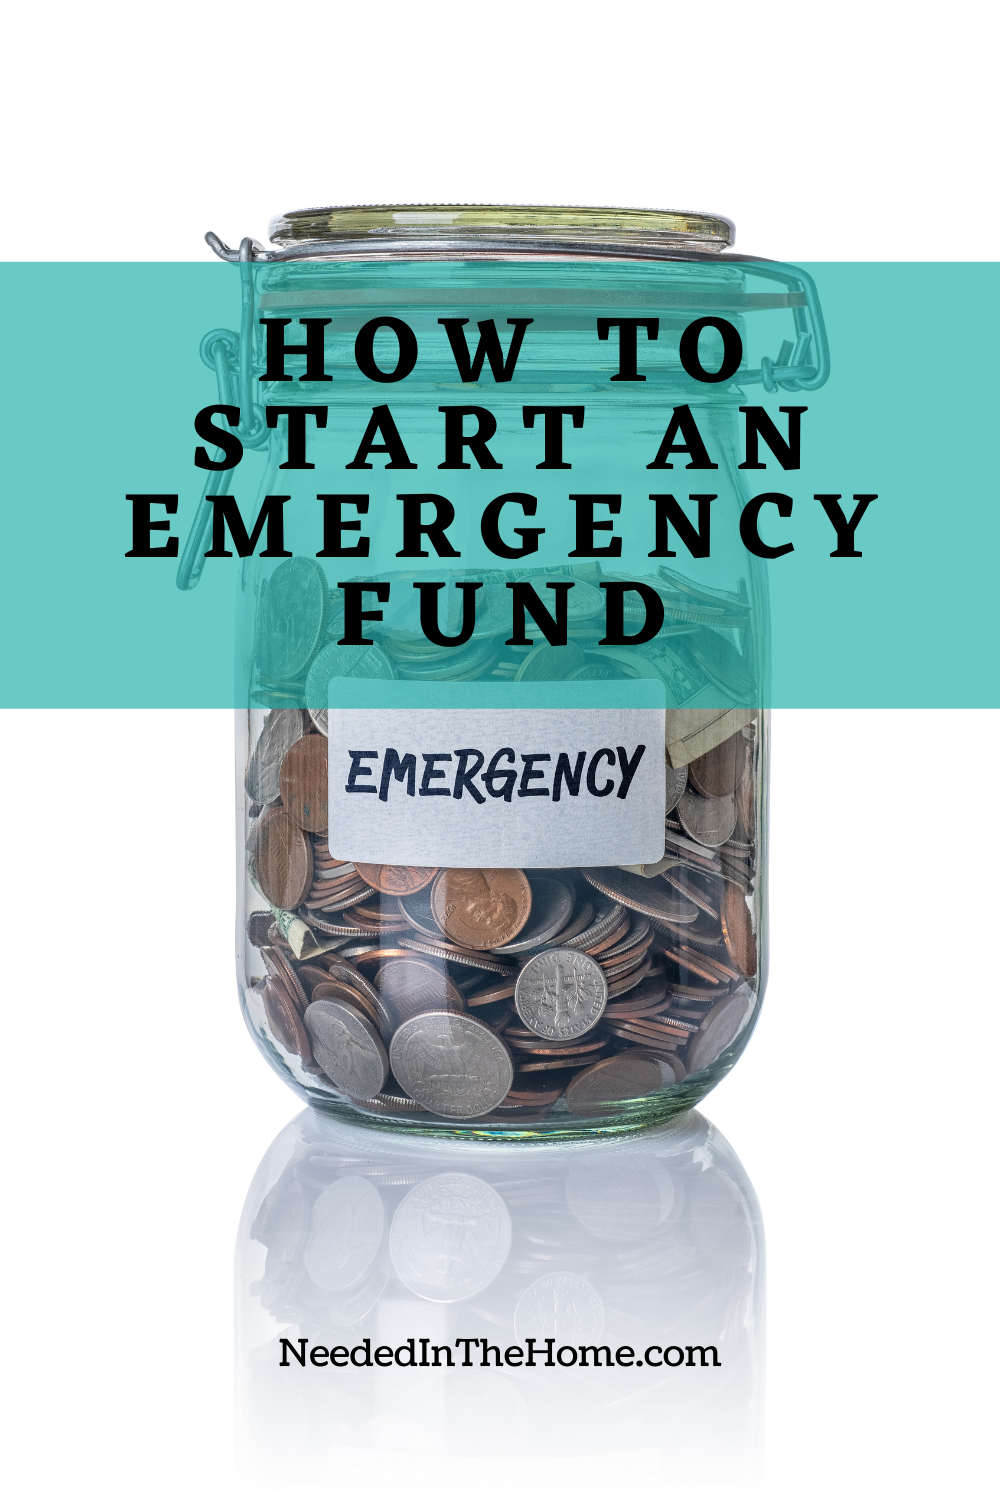 pinterest-pin-description how to start an emergency fund glass jar full of coins with flip lid closed labeled emergency neededinthehome